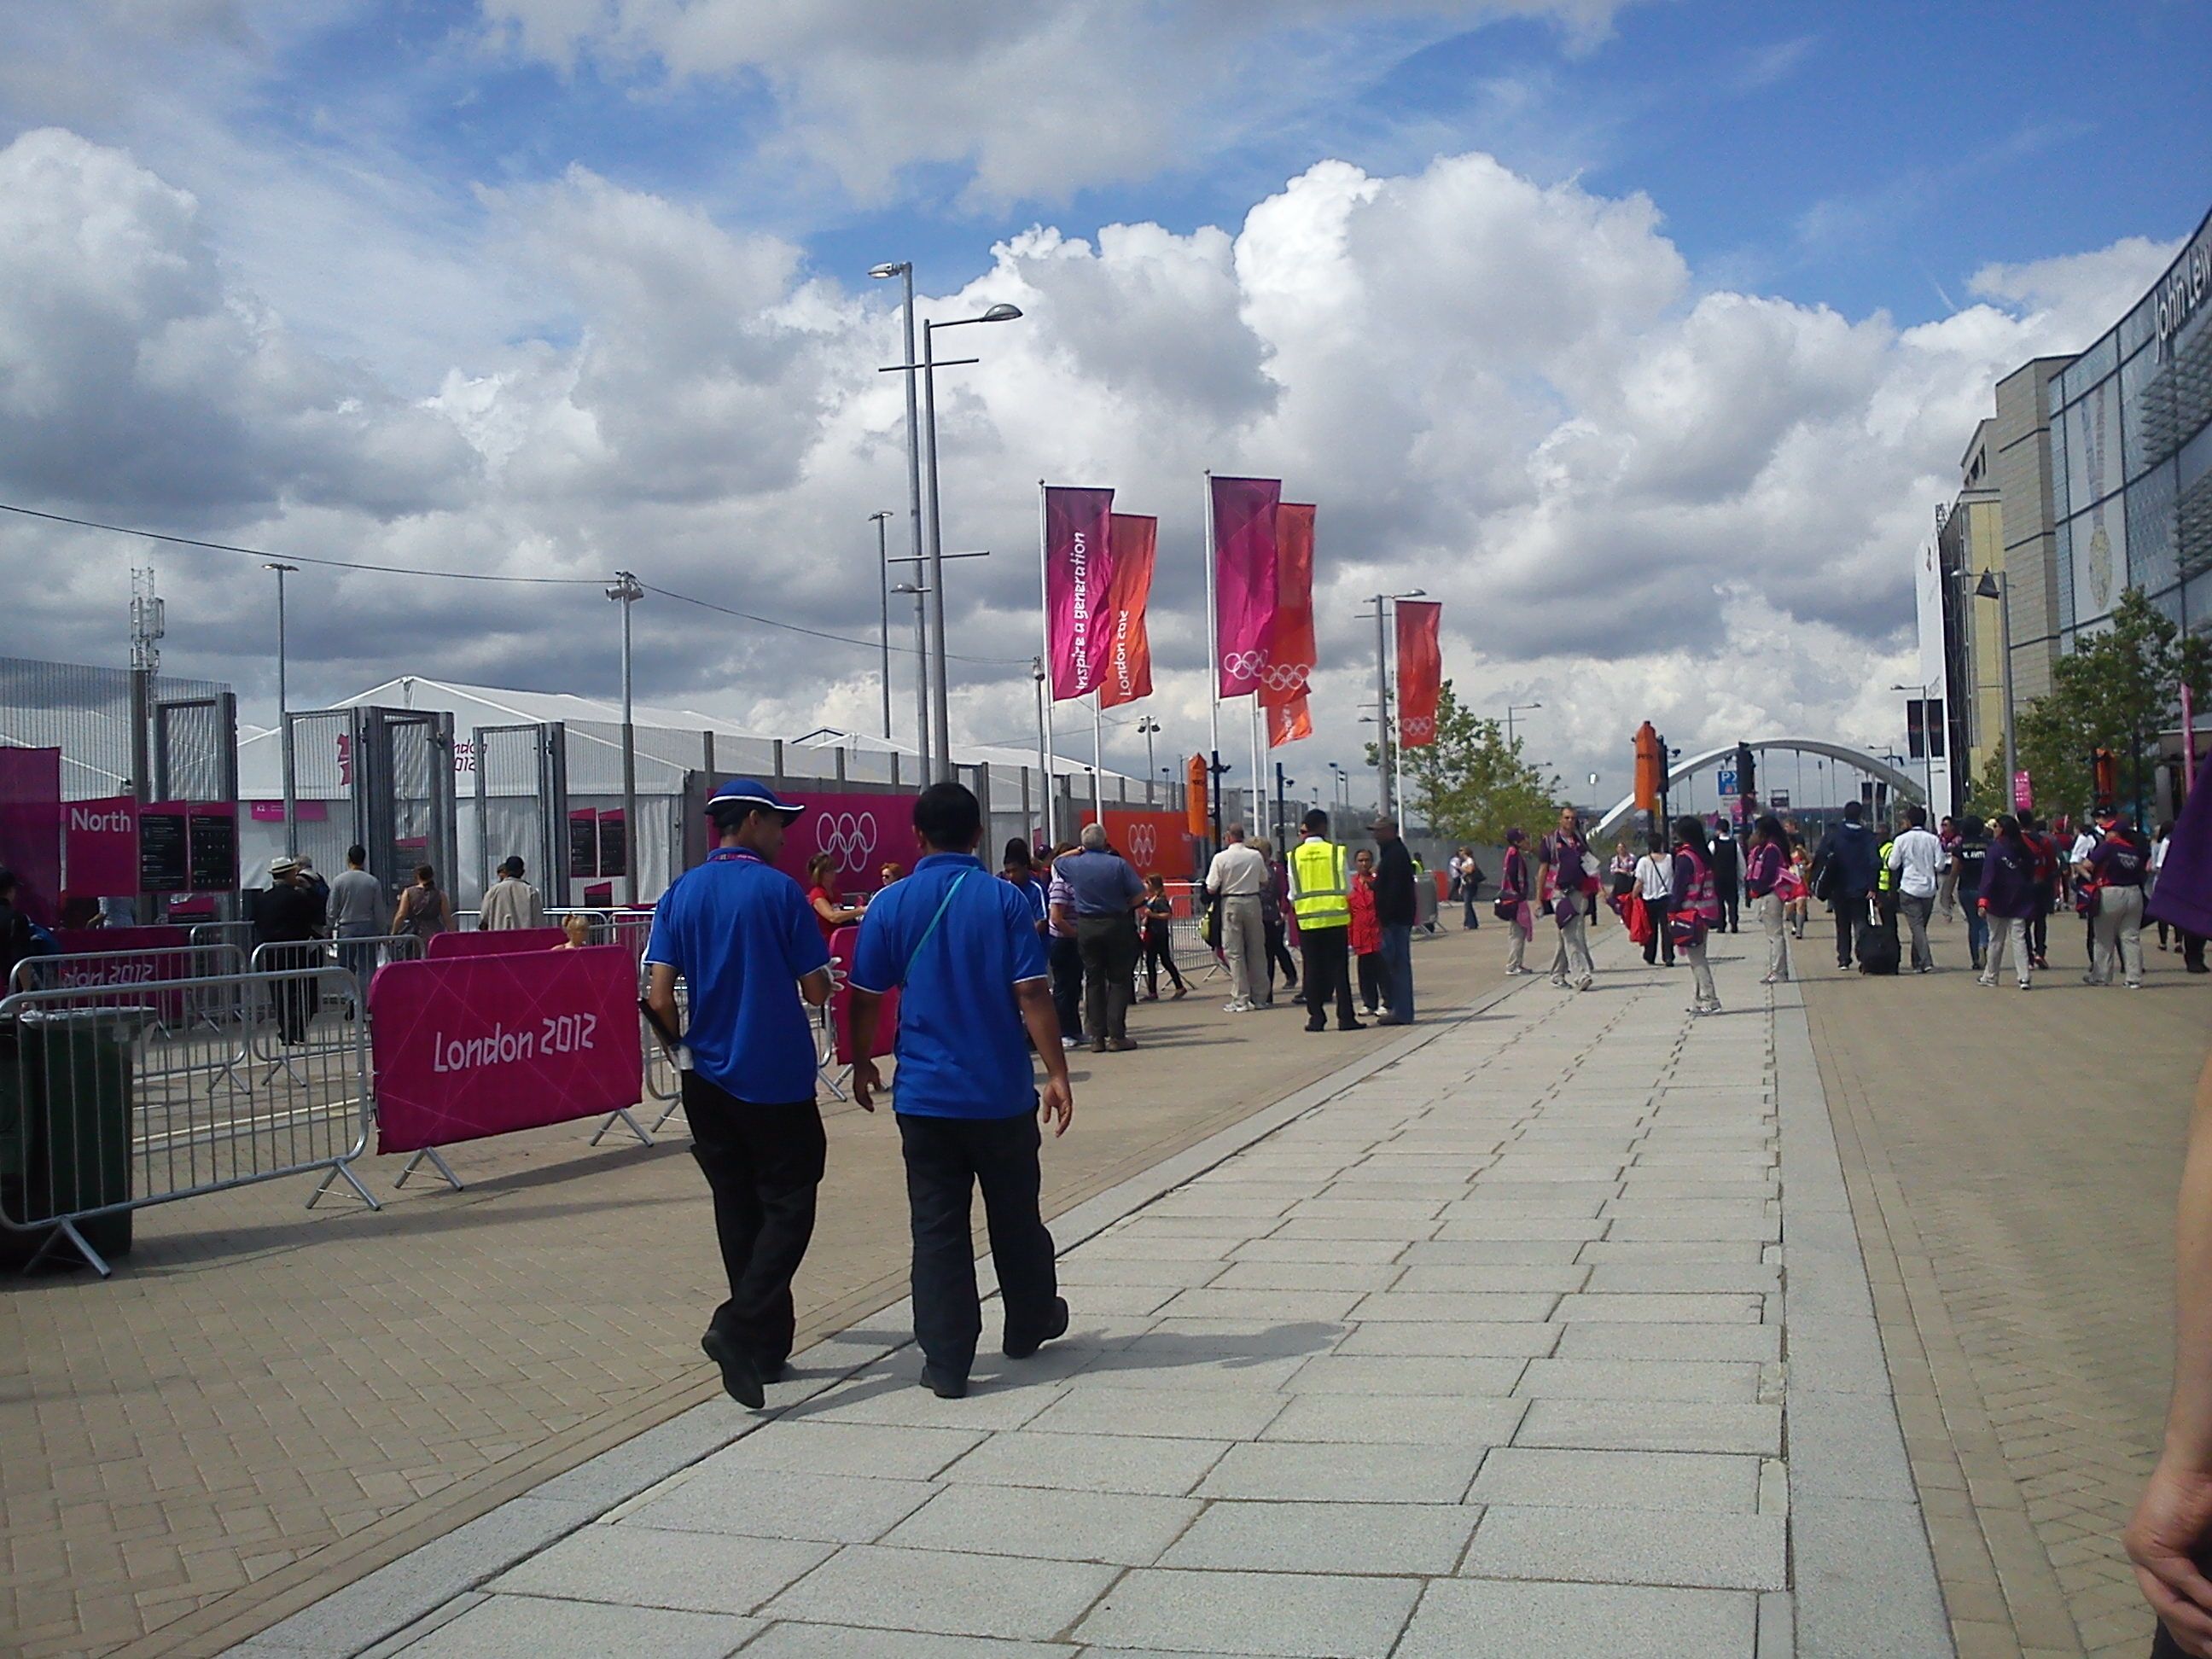 02 Arrival at Olympic Park